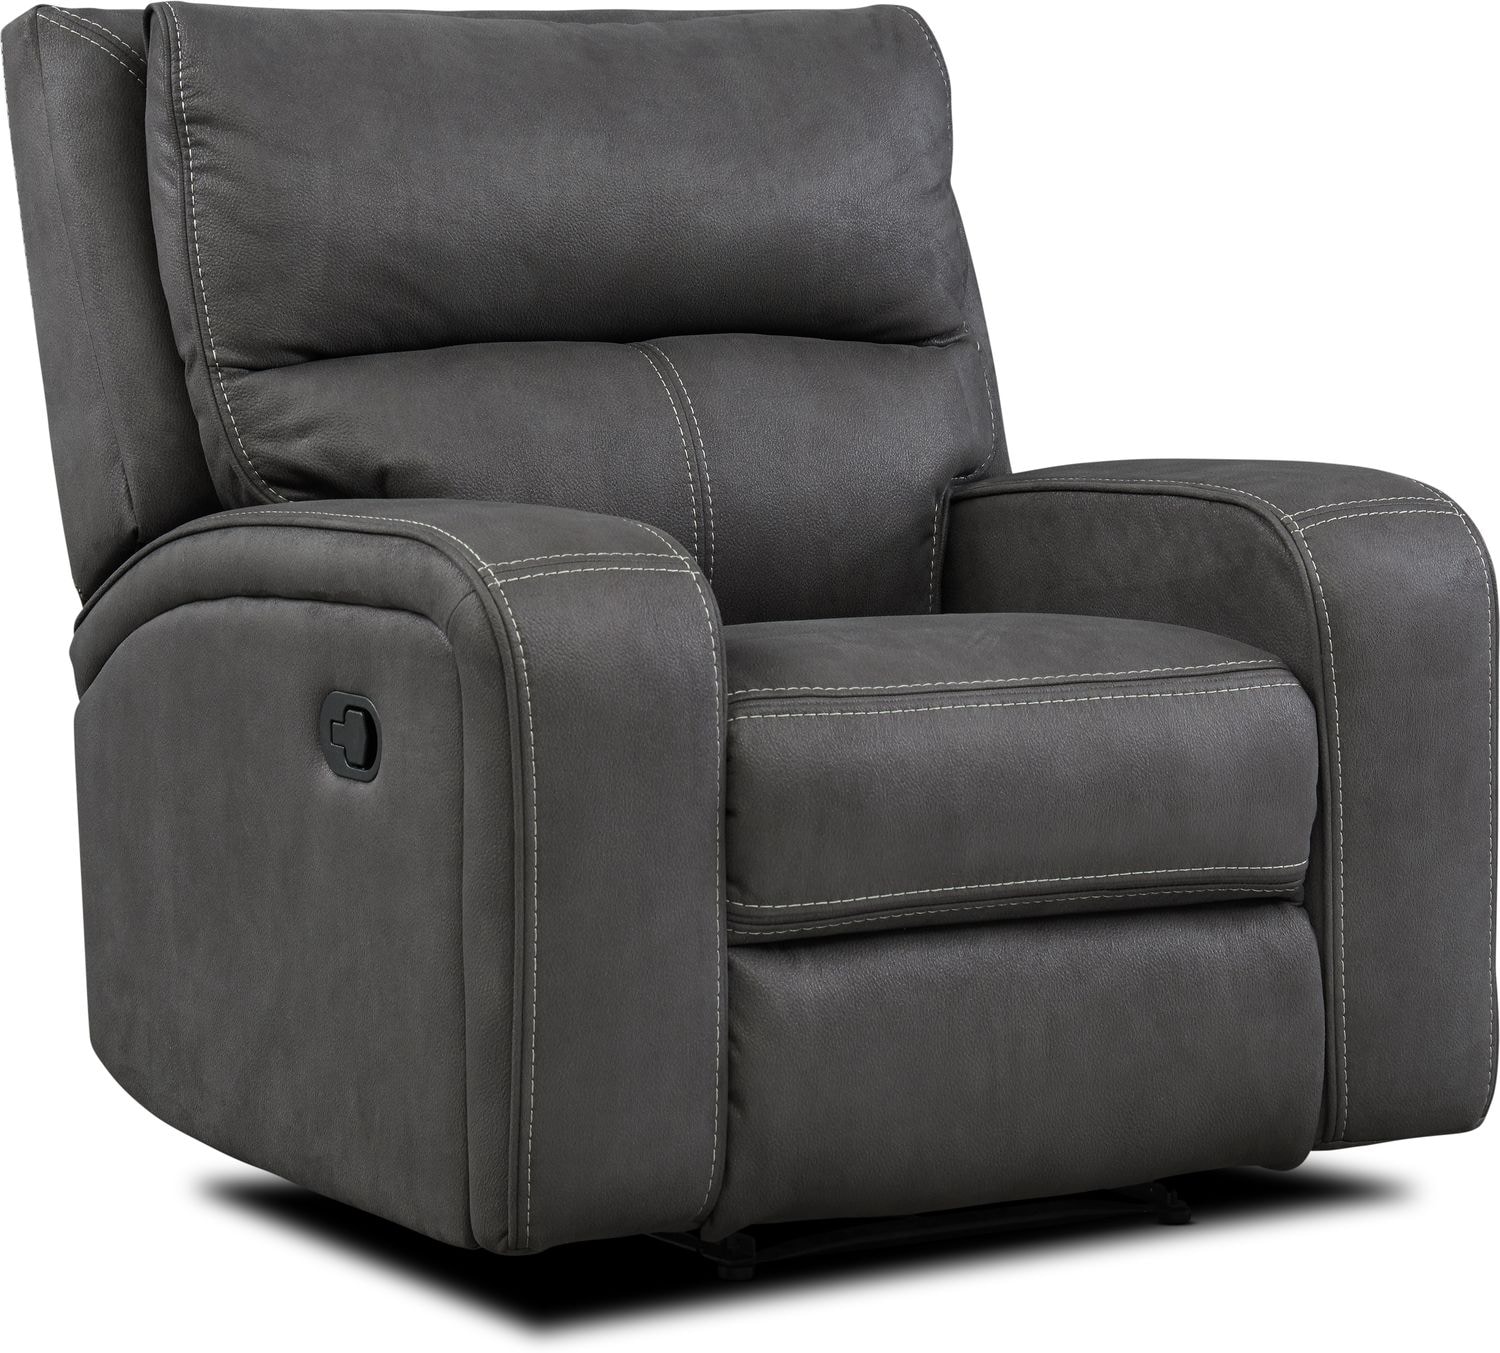 Reclining Chairs | Value City Furniture